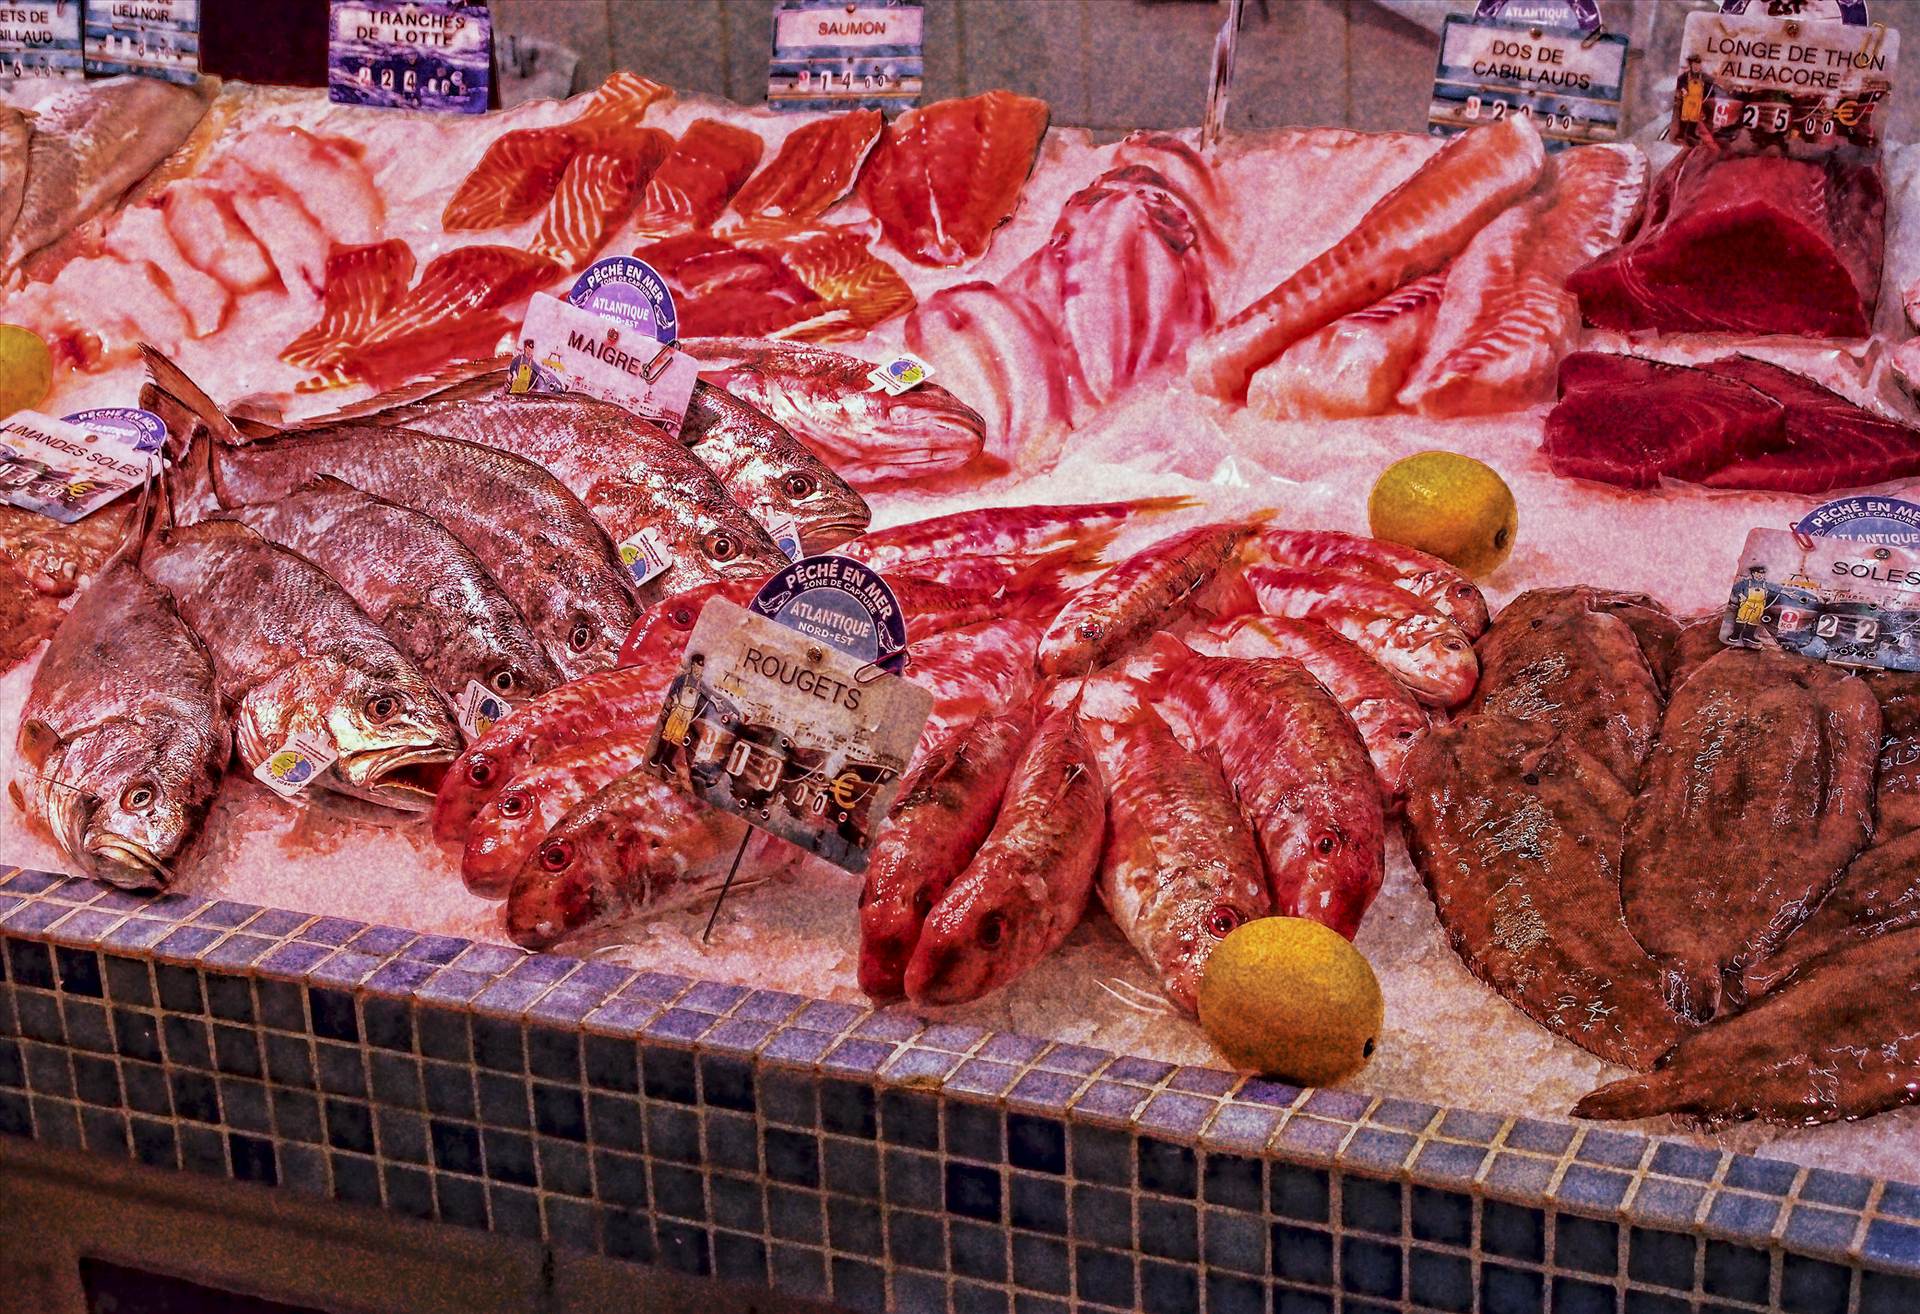 Le Havre Fishmarket2.jpg undefined by WPC-208